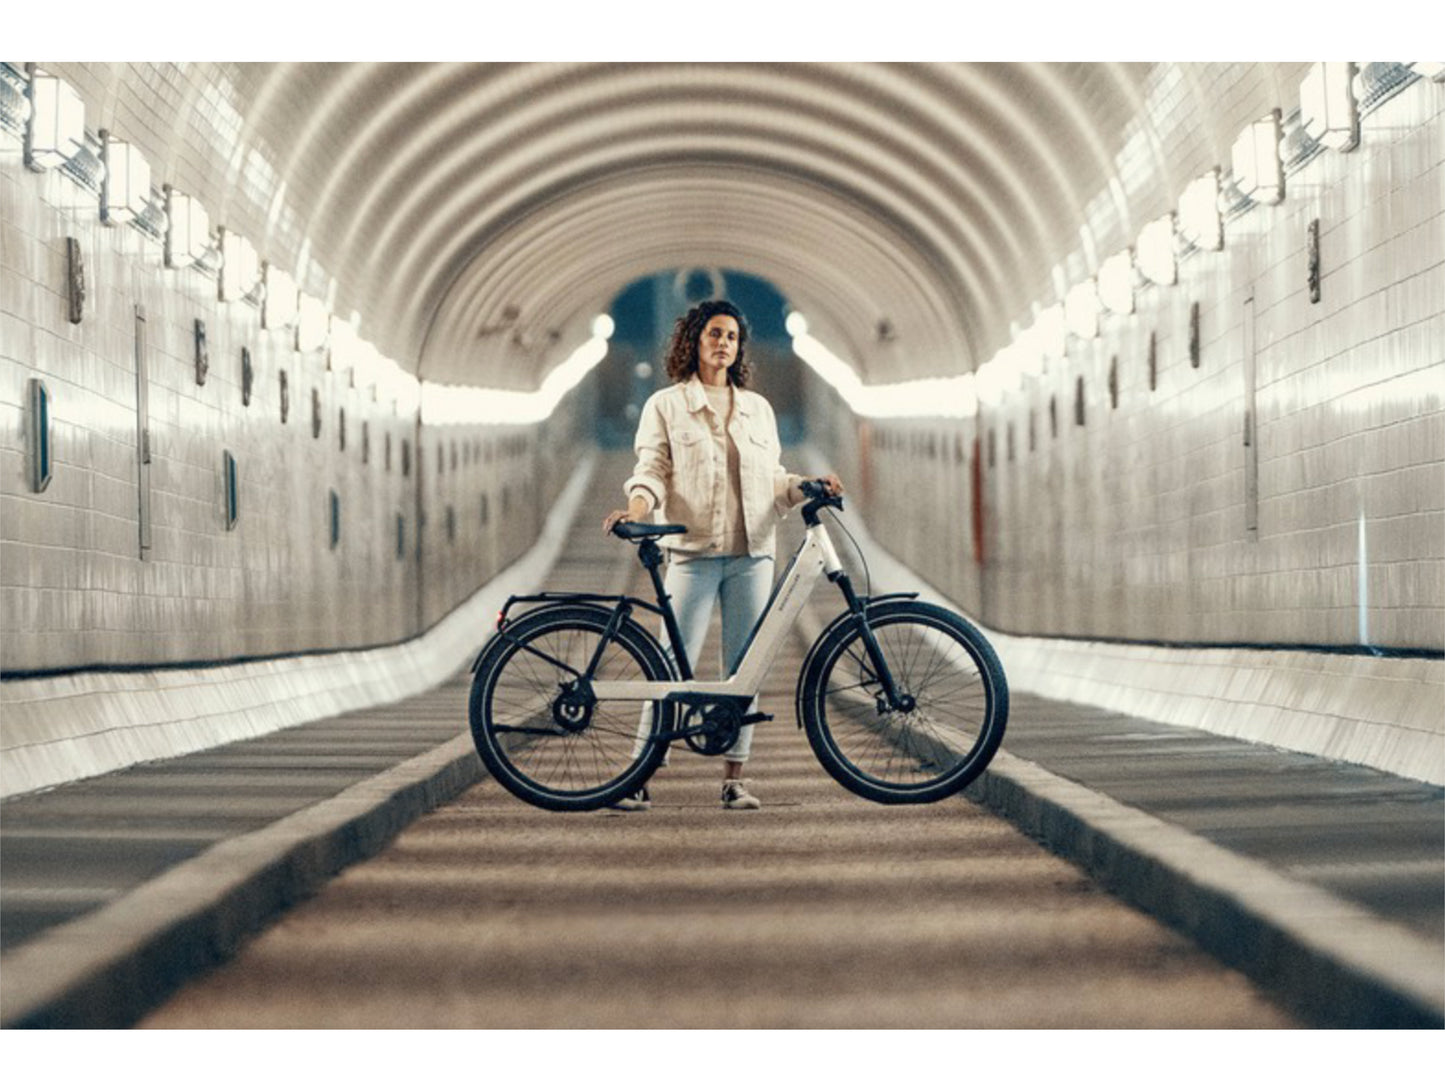 Riese and Muller Nevo GT Vario emtb hardtail woman in city tunnel bike path